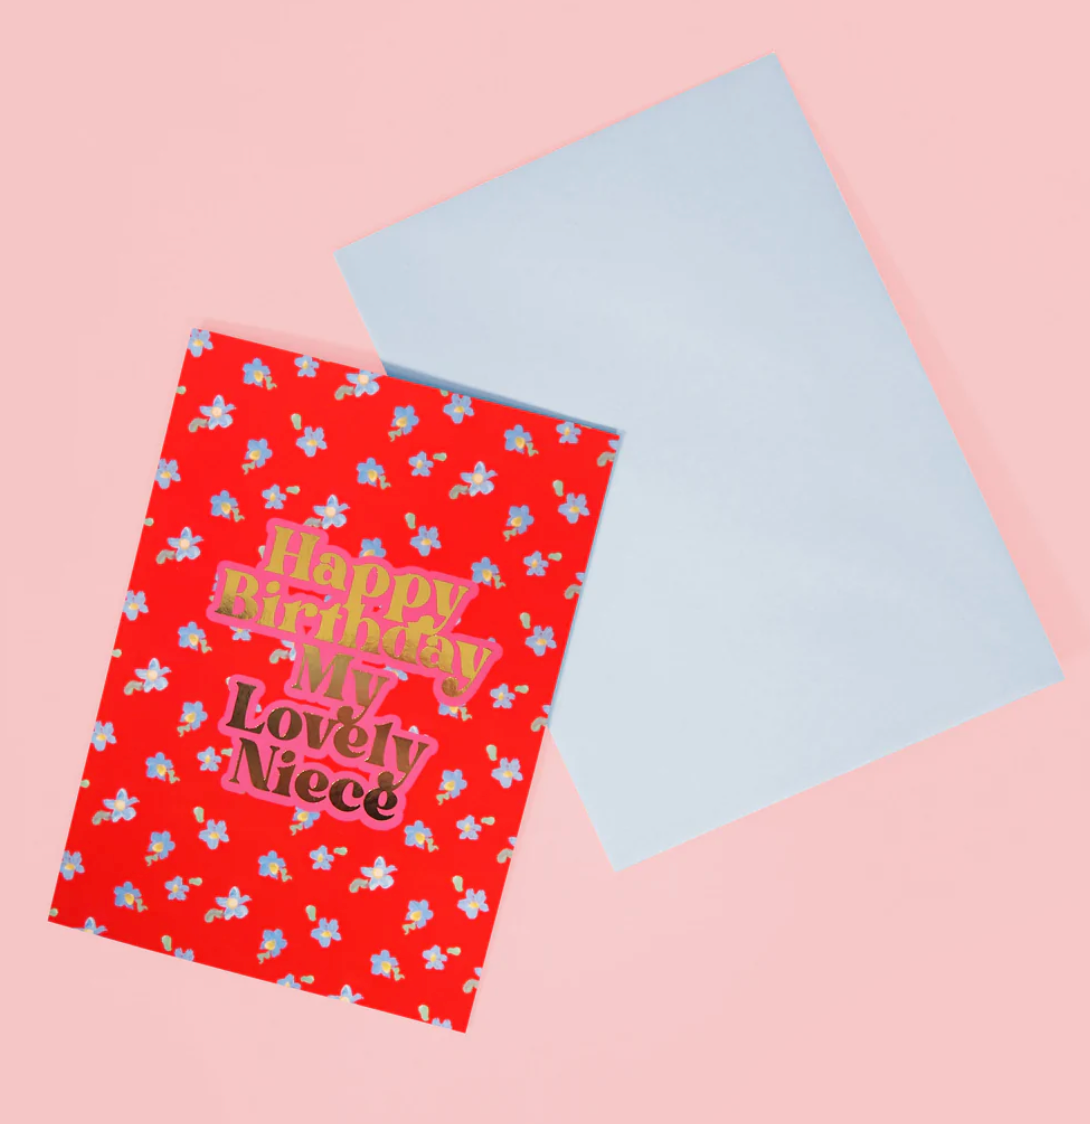 HAPPY BIRTHDAY LOVELY NIECE FLORAL | CARD BY ELEANOR BOWMER